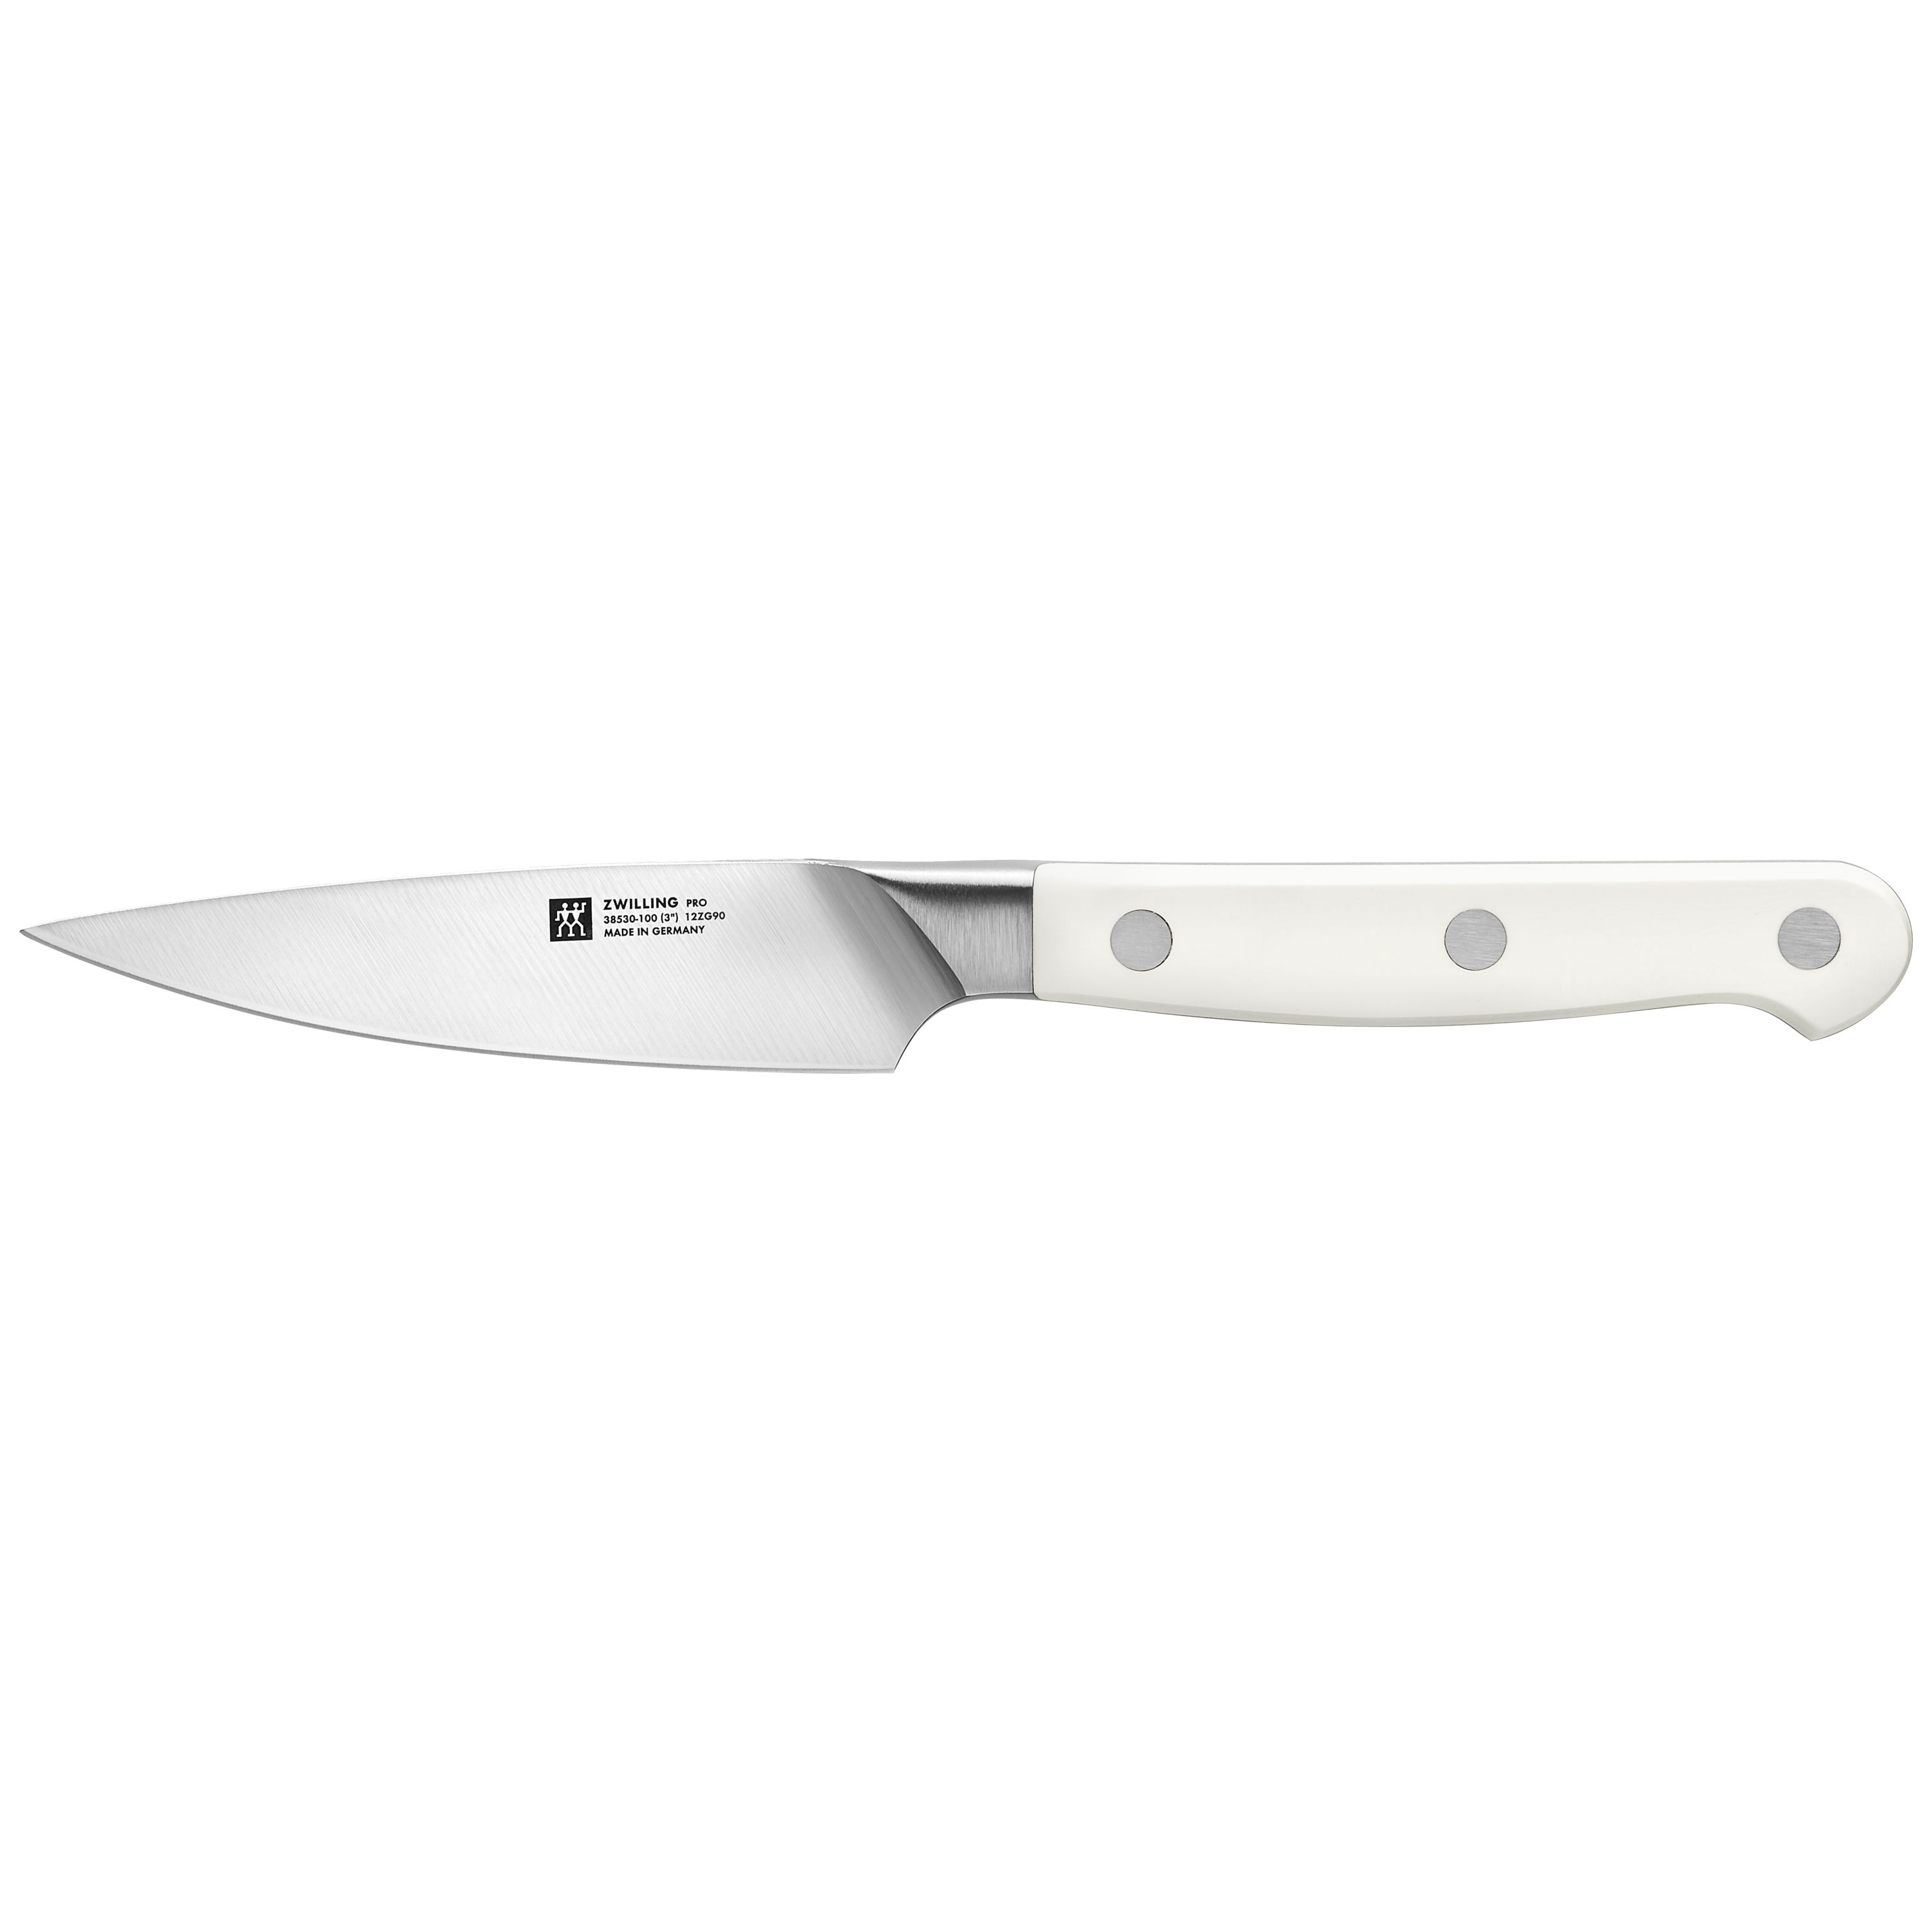 ZWILLING J.A. Henckels Pro Le Blanc Knife Collection on Food52